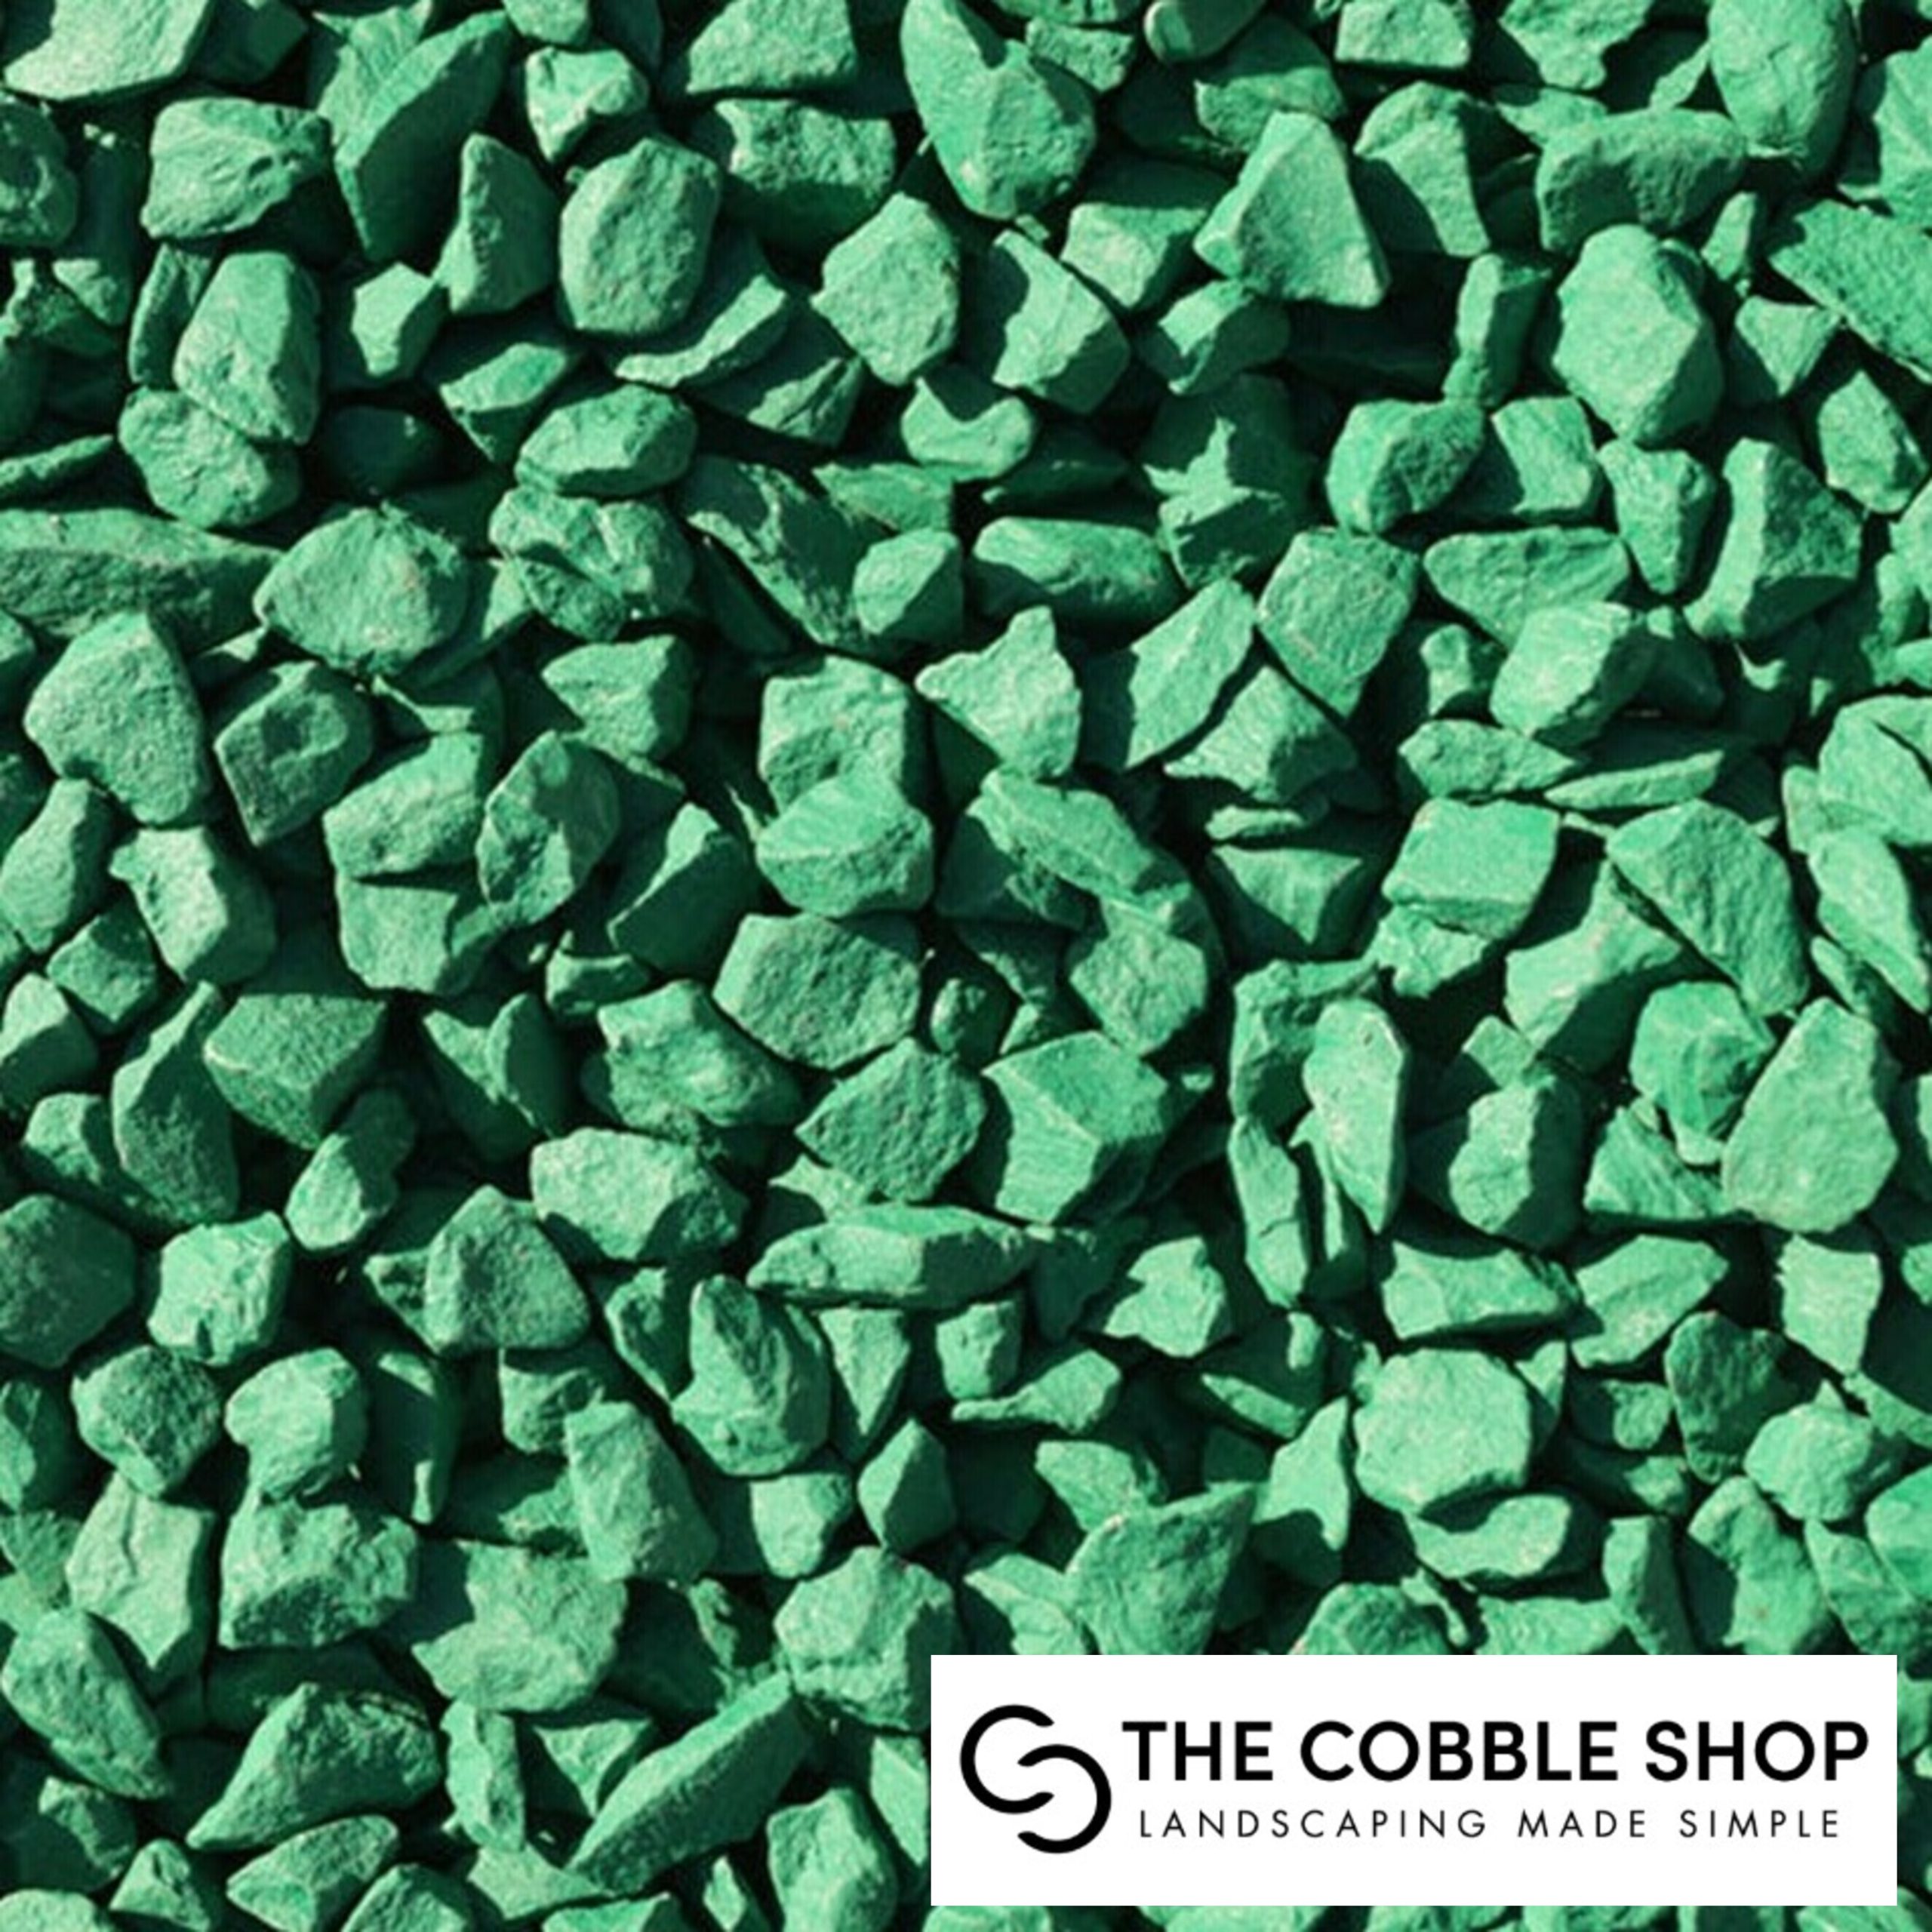 https://thecobbleshop.co.uk/wp-content/uploads/2019/06/Emerald-Green-with-logo-1-scaled.jpeg